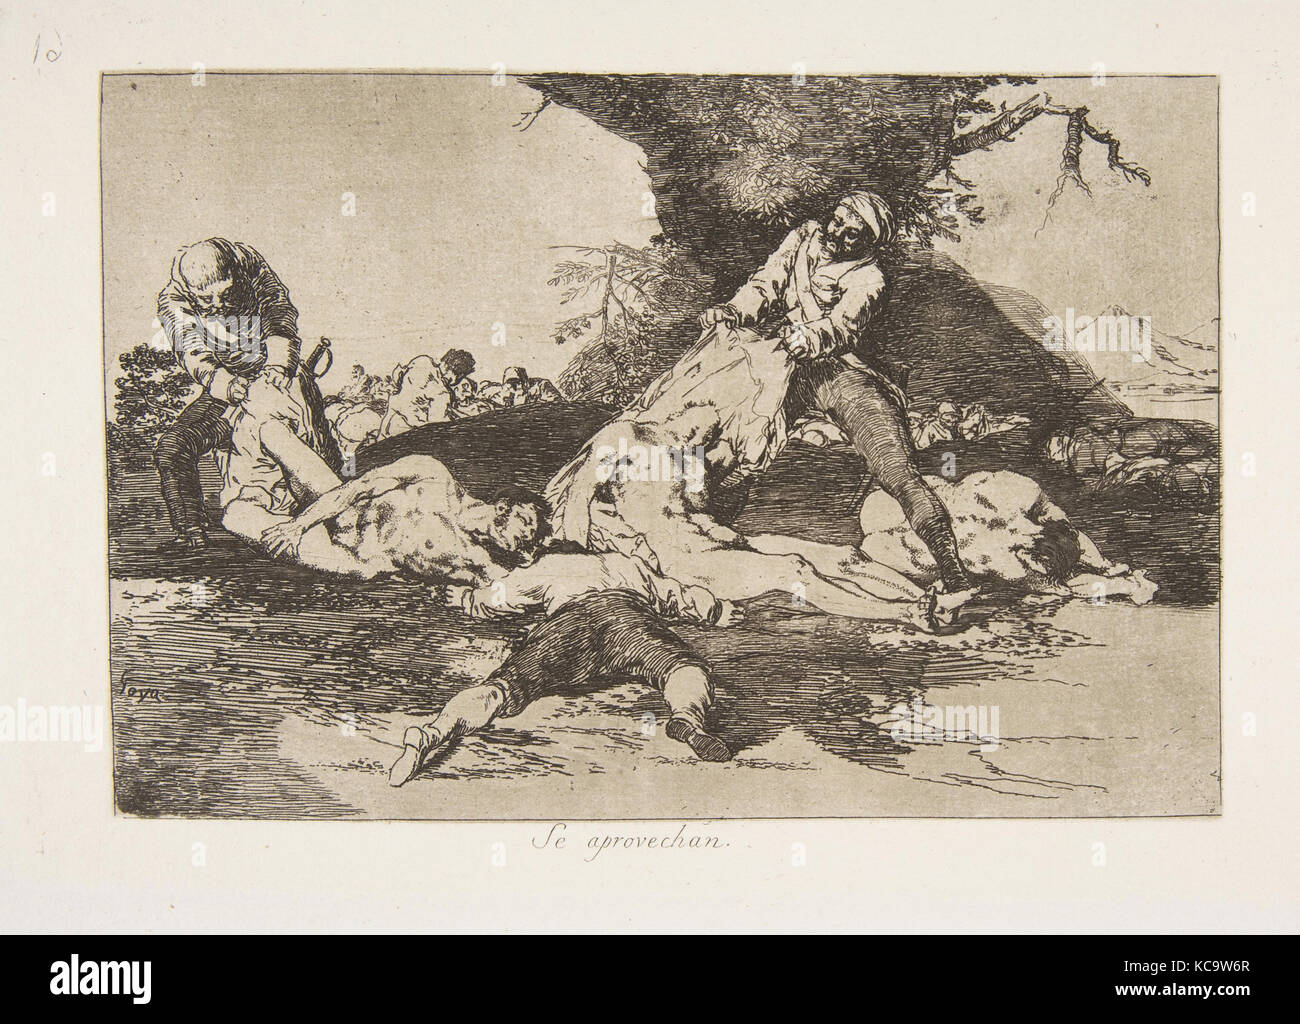 Plate 16 from 'The Disasters of War' (Los Desastres de la Guerra):' They make use of them.' (Se aprovechan.), Goya, 1810 Stock Photo